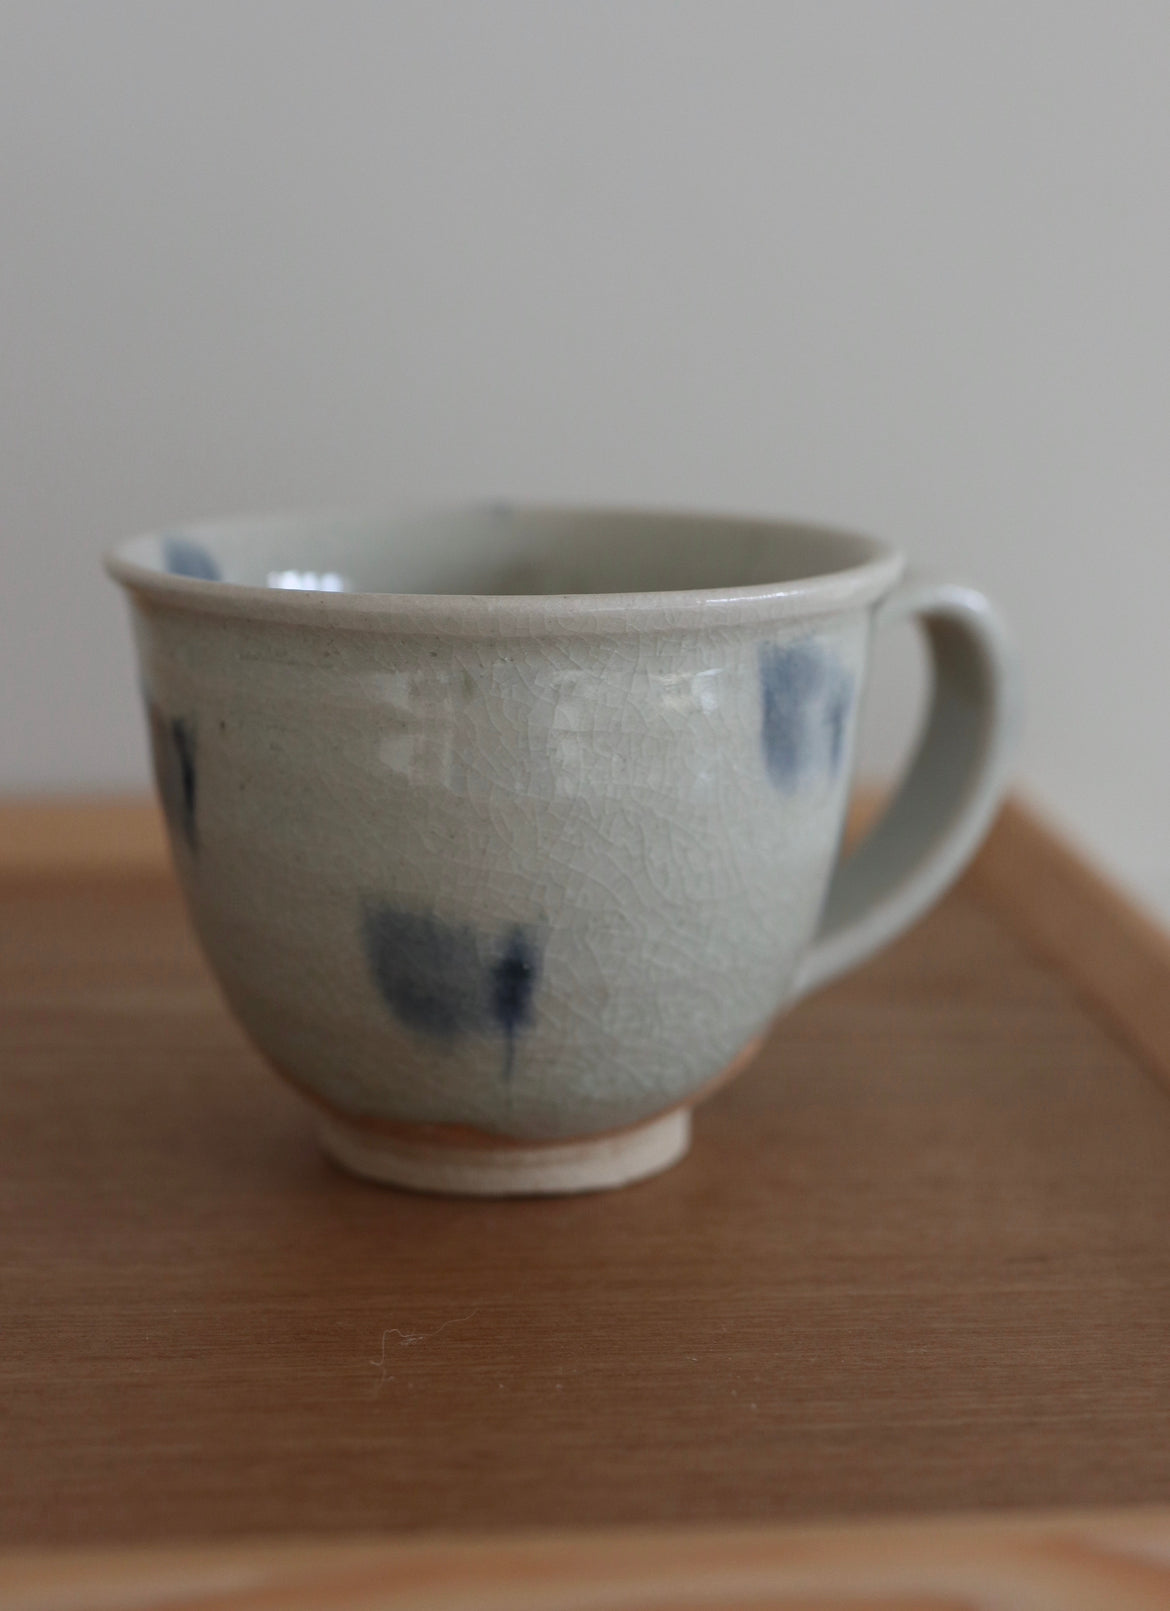 Japanese cup with blue spots and handle